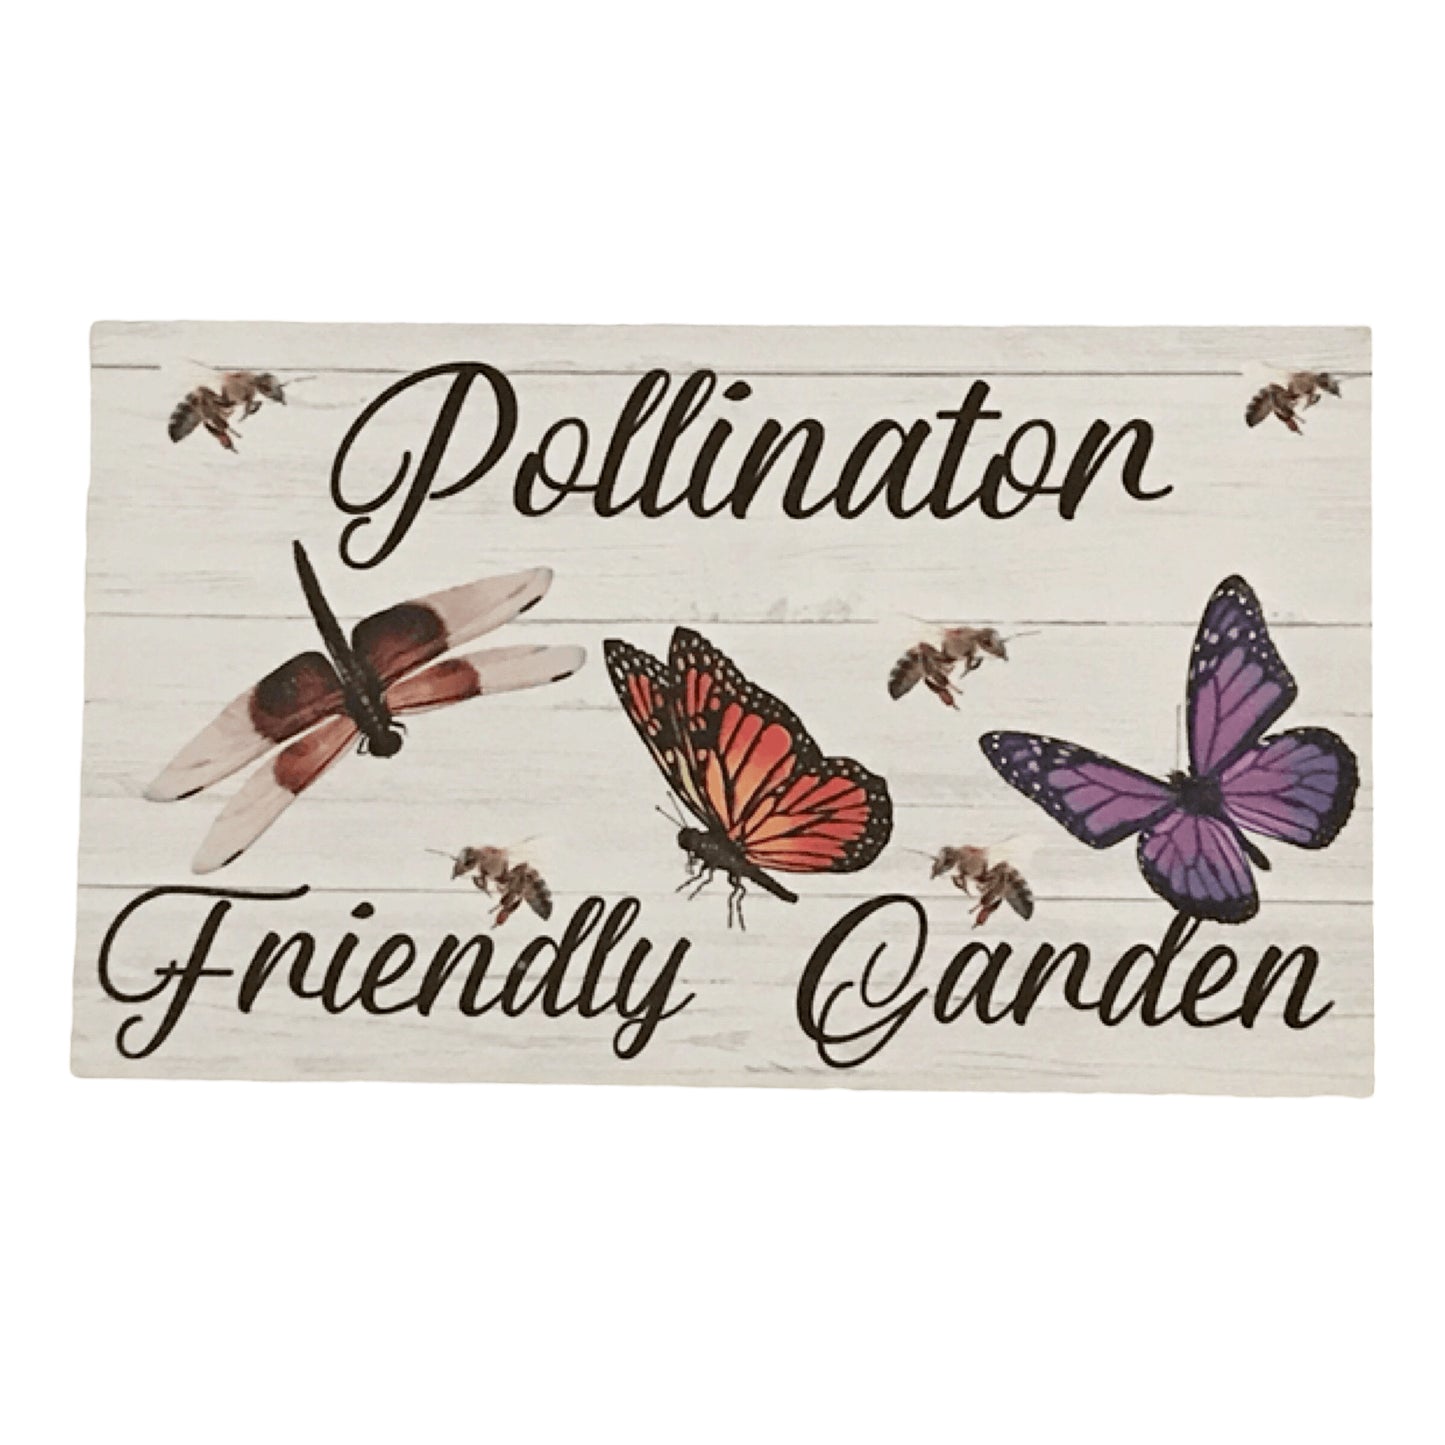 Pollination Friendly Garden Bee Butterfly Dragonfly Sign - The Renmy Store Homewares & Gifts 